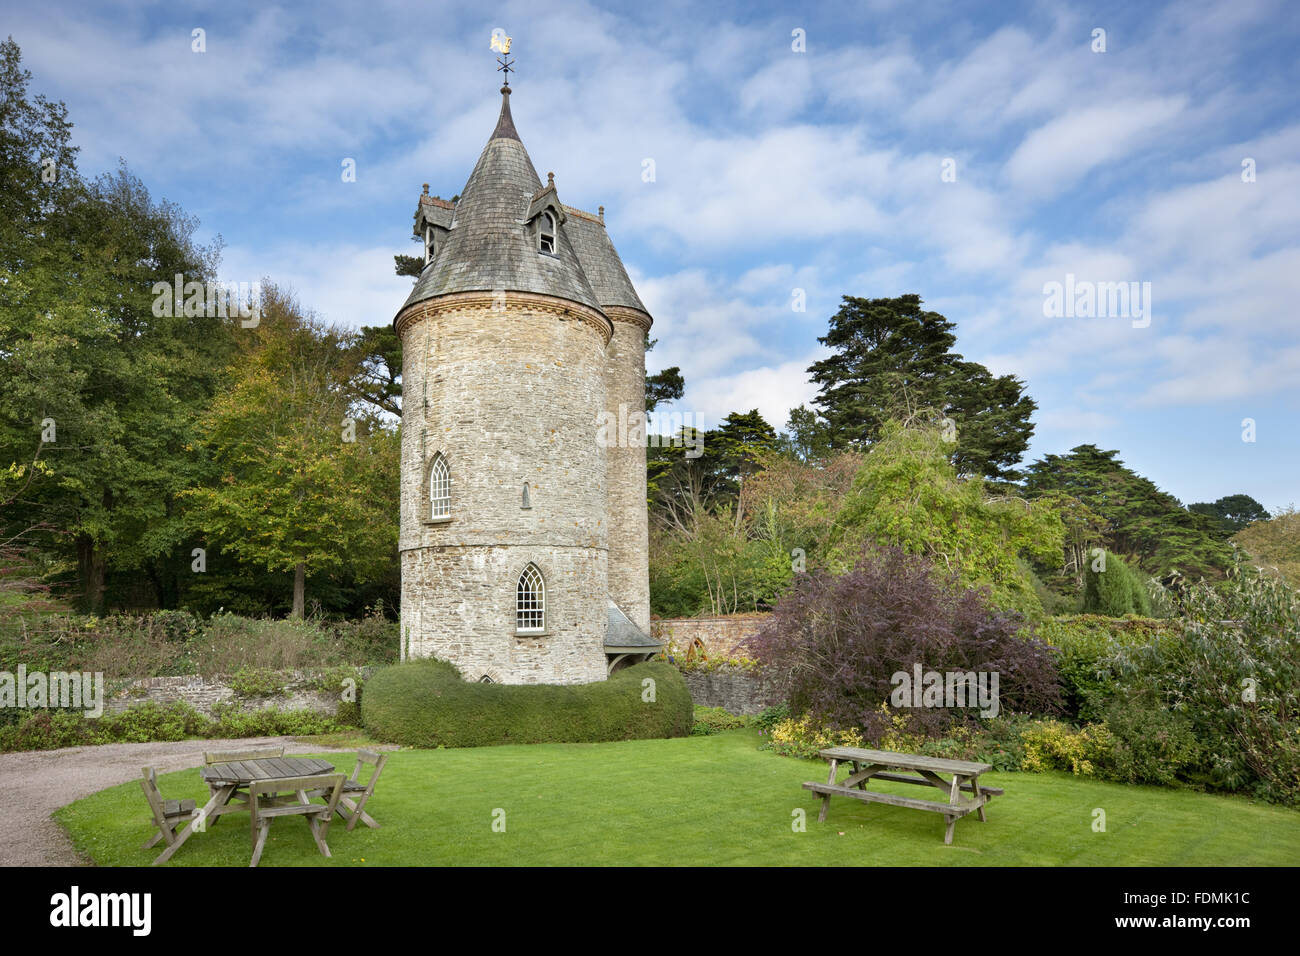 The Water Tower at Trelissick Garden, Cornwall. The building was put up, probably in the 1820s, to provide water pressure for the house and garden. It is now a National Trust holiday cottage. Stock Photo